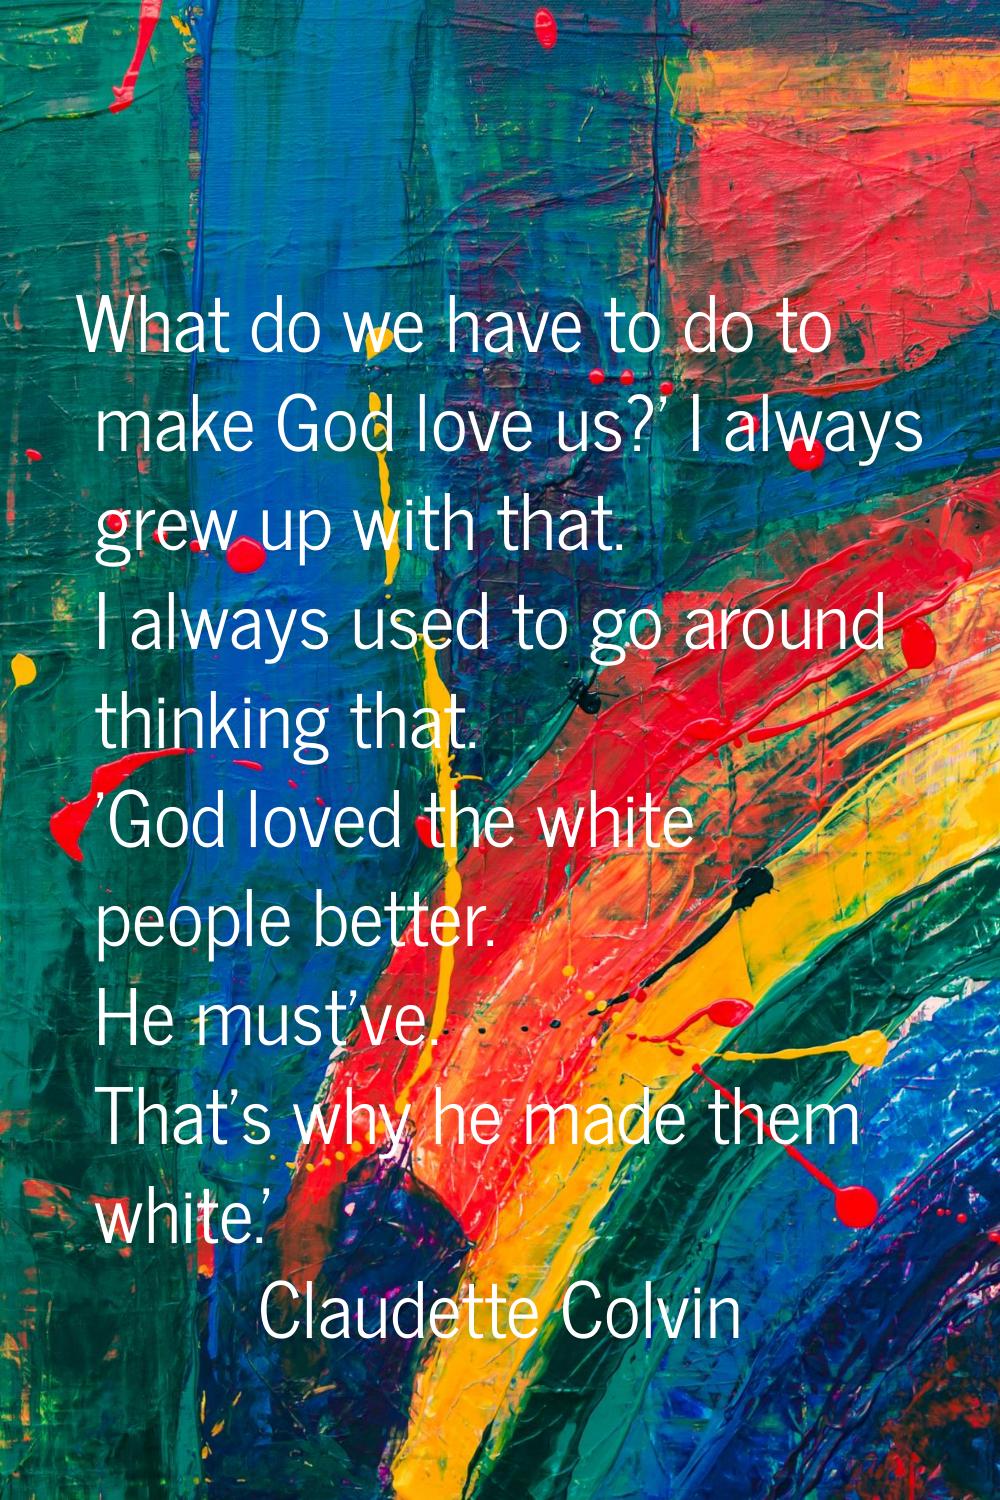 What do we have to do to make God love us?' I always grew up with that. I always used to go around 